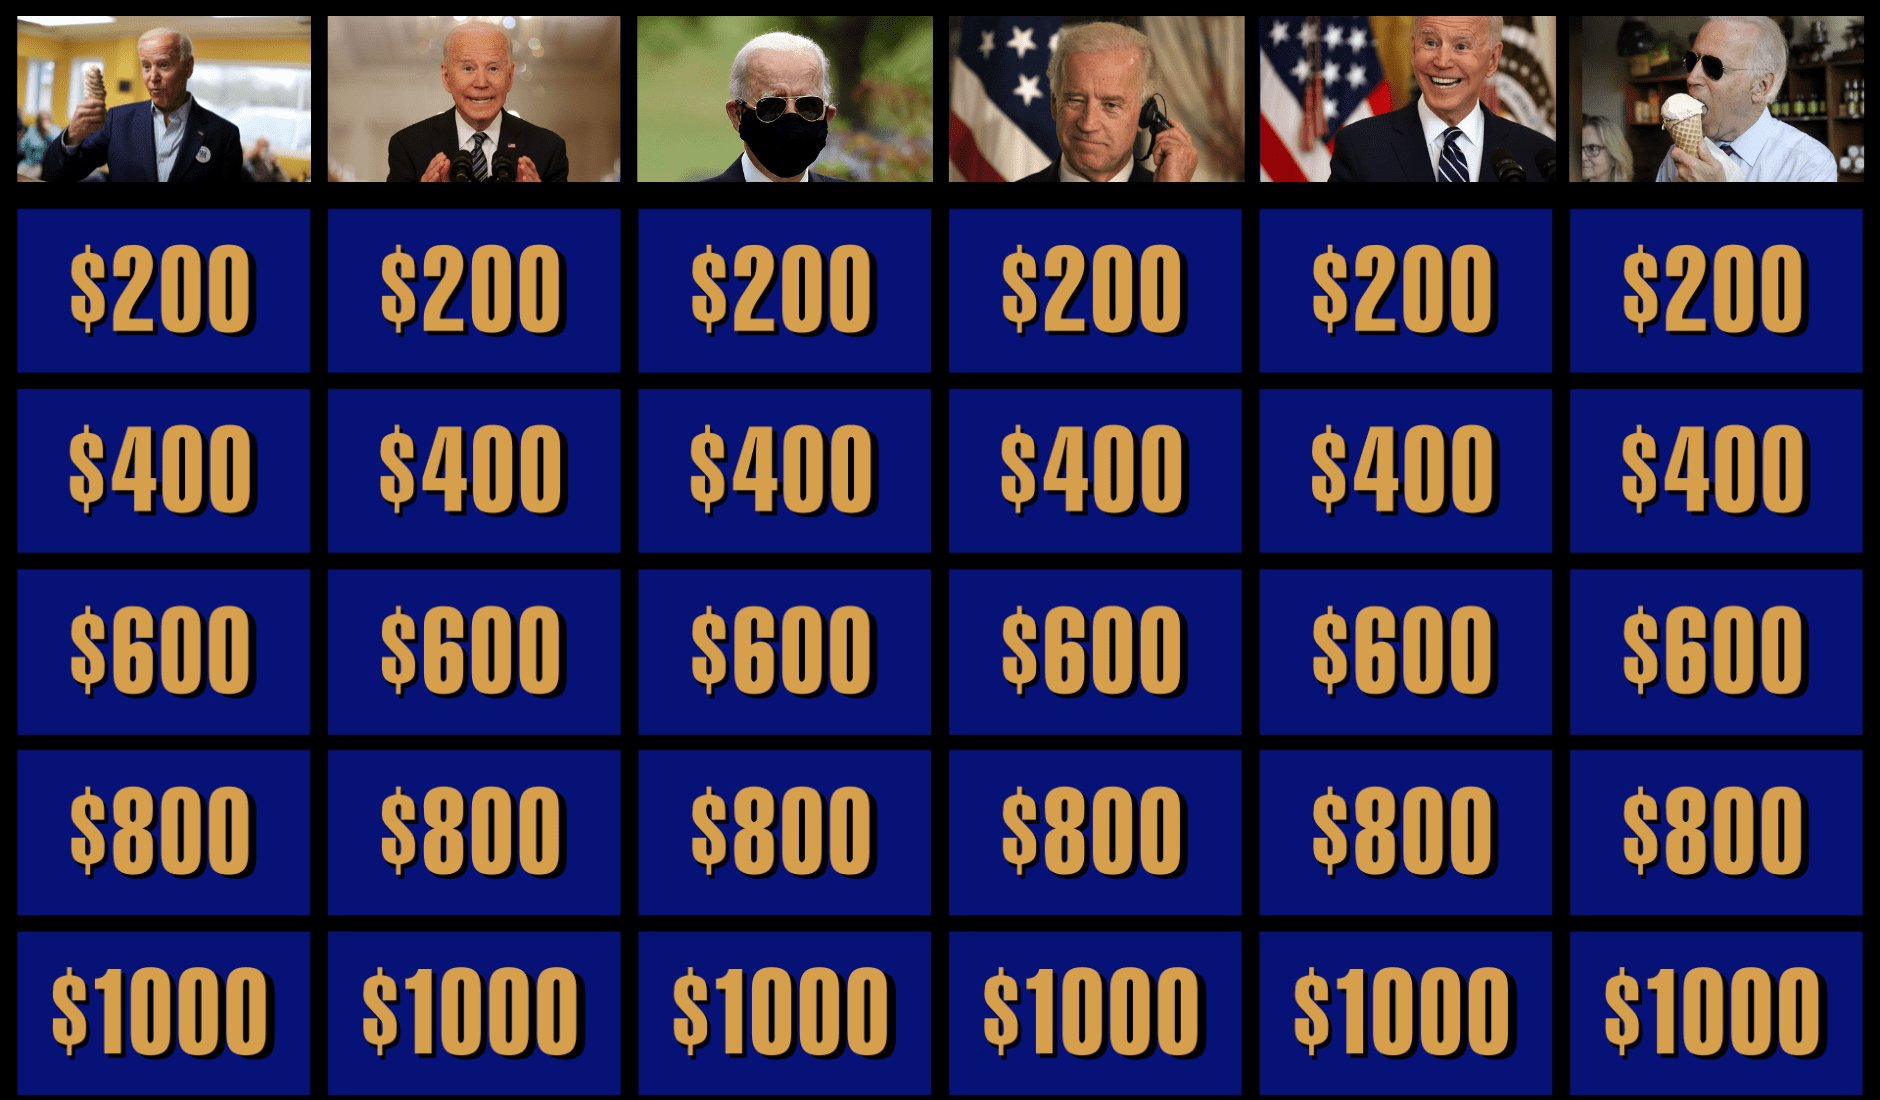 Featured image for “Delaware Dems want you to pay $46 to flex your Joe Biden knowledge”